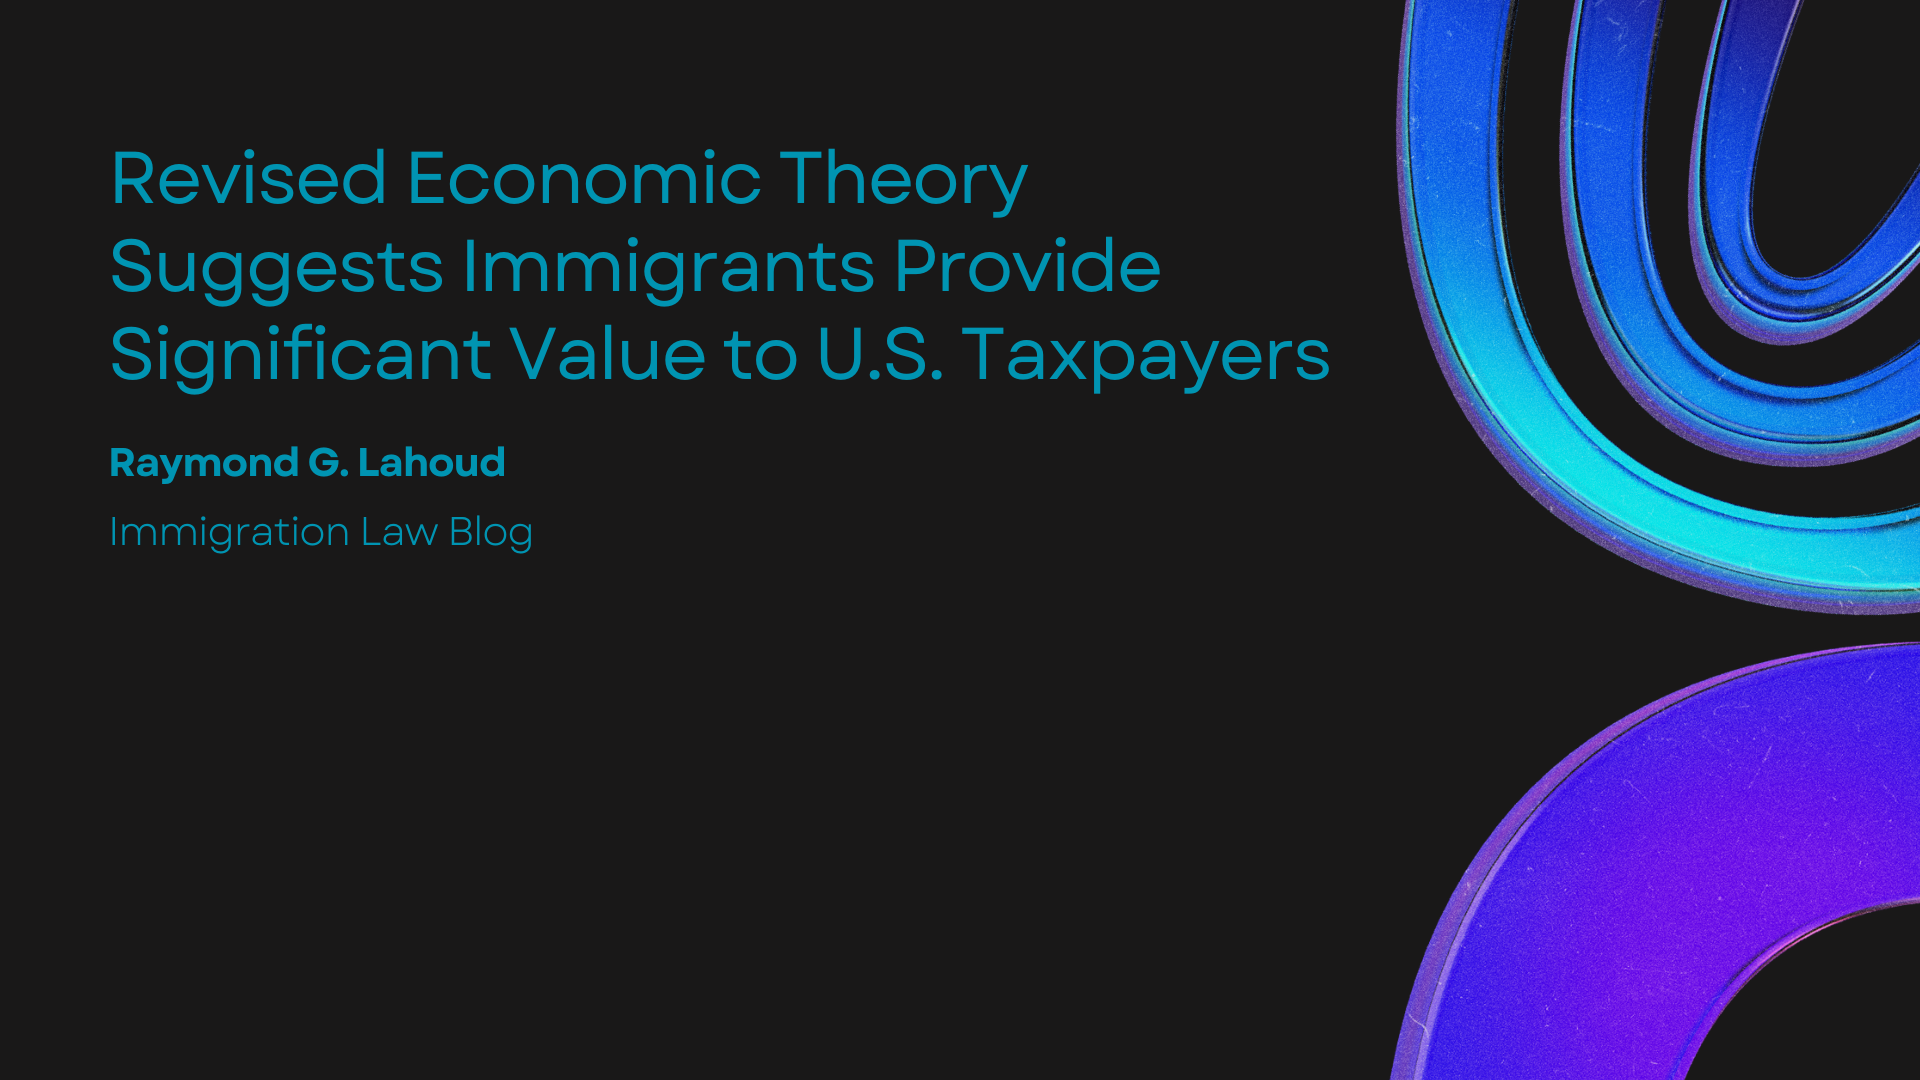 Revised Economic Theory Suggests Immigrants Provide Significant Value to U.S. Taxpayers